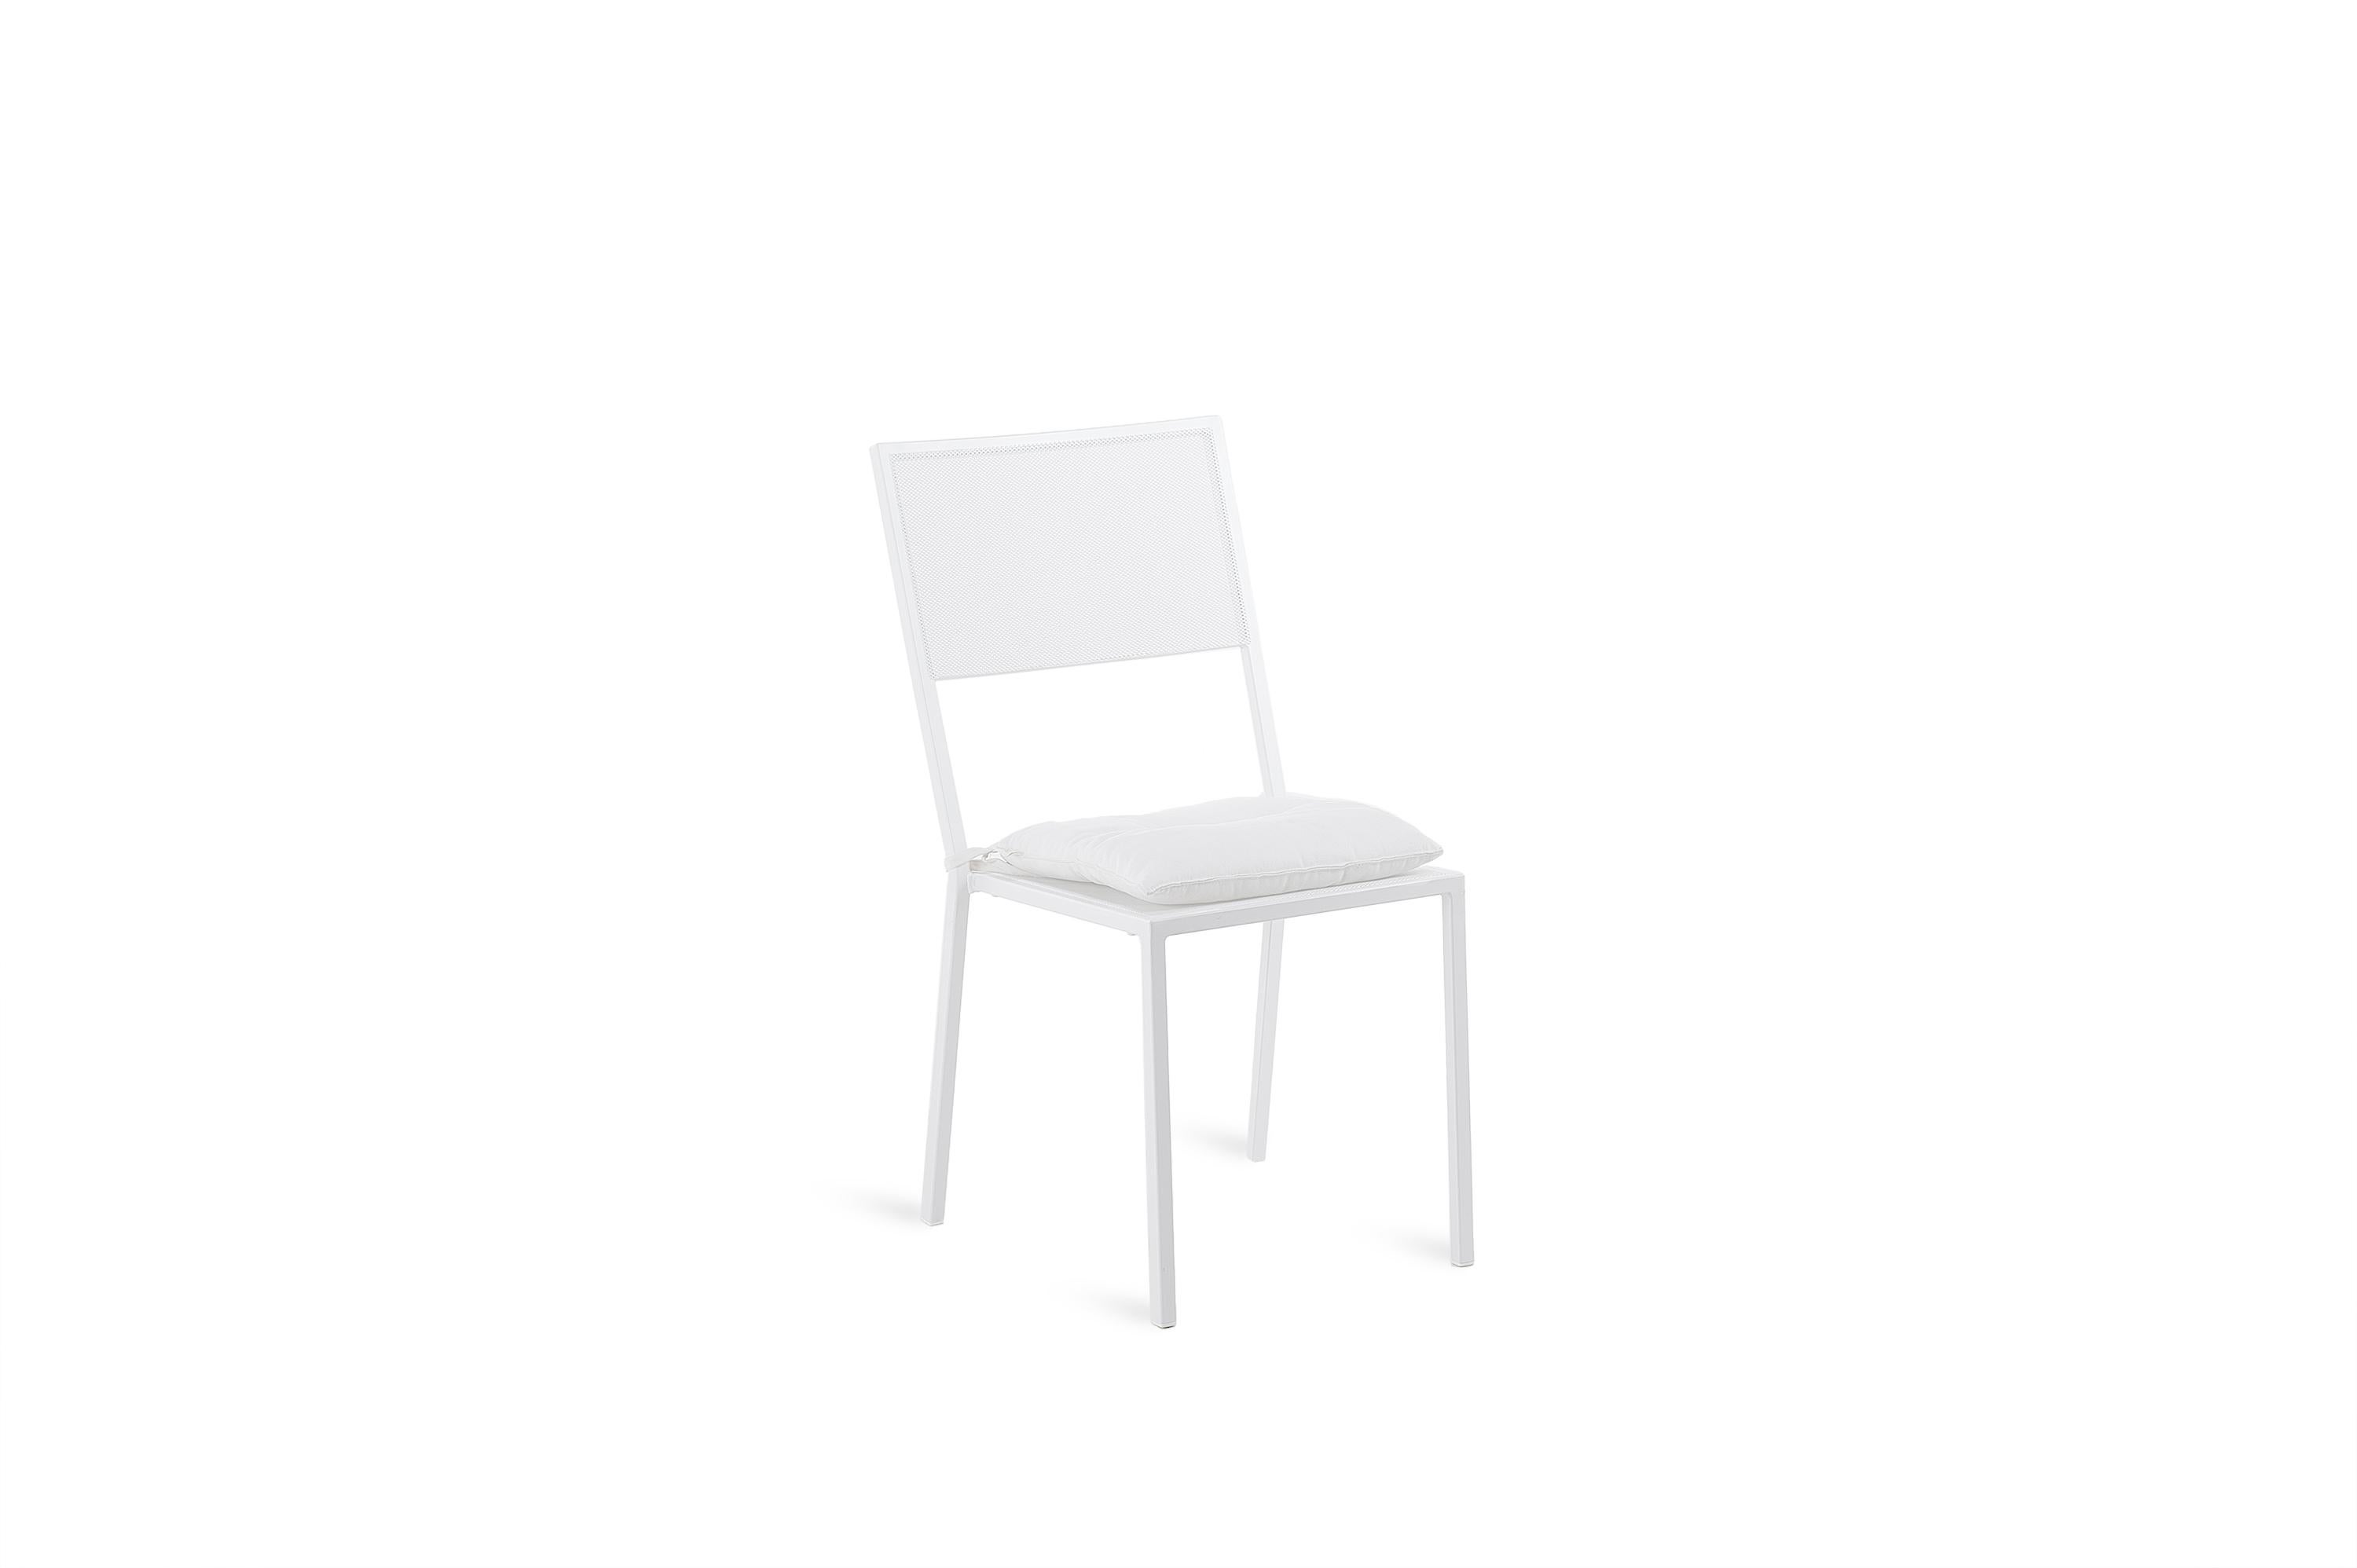 Iron Unopiu' Conrad Chairs Outdoor Collection For Sale